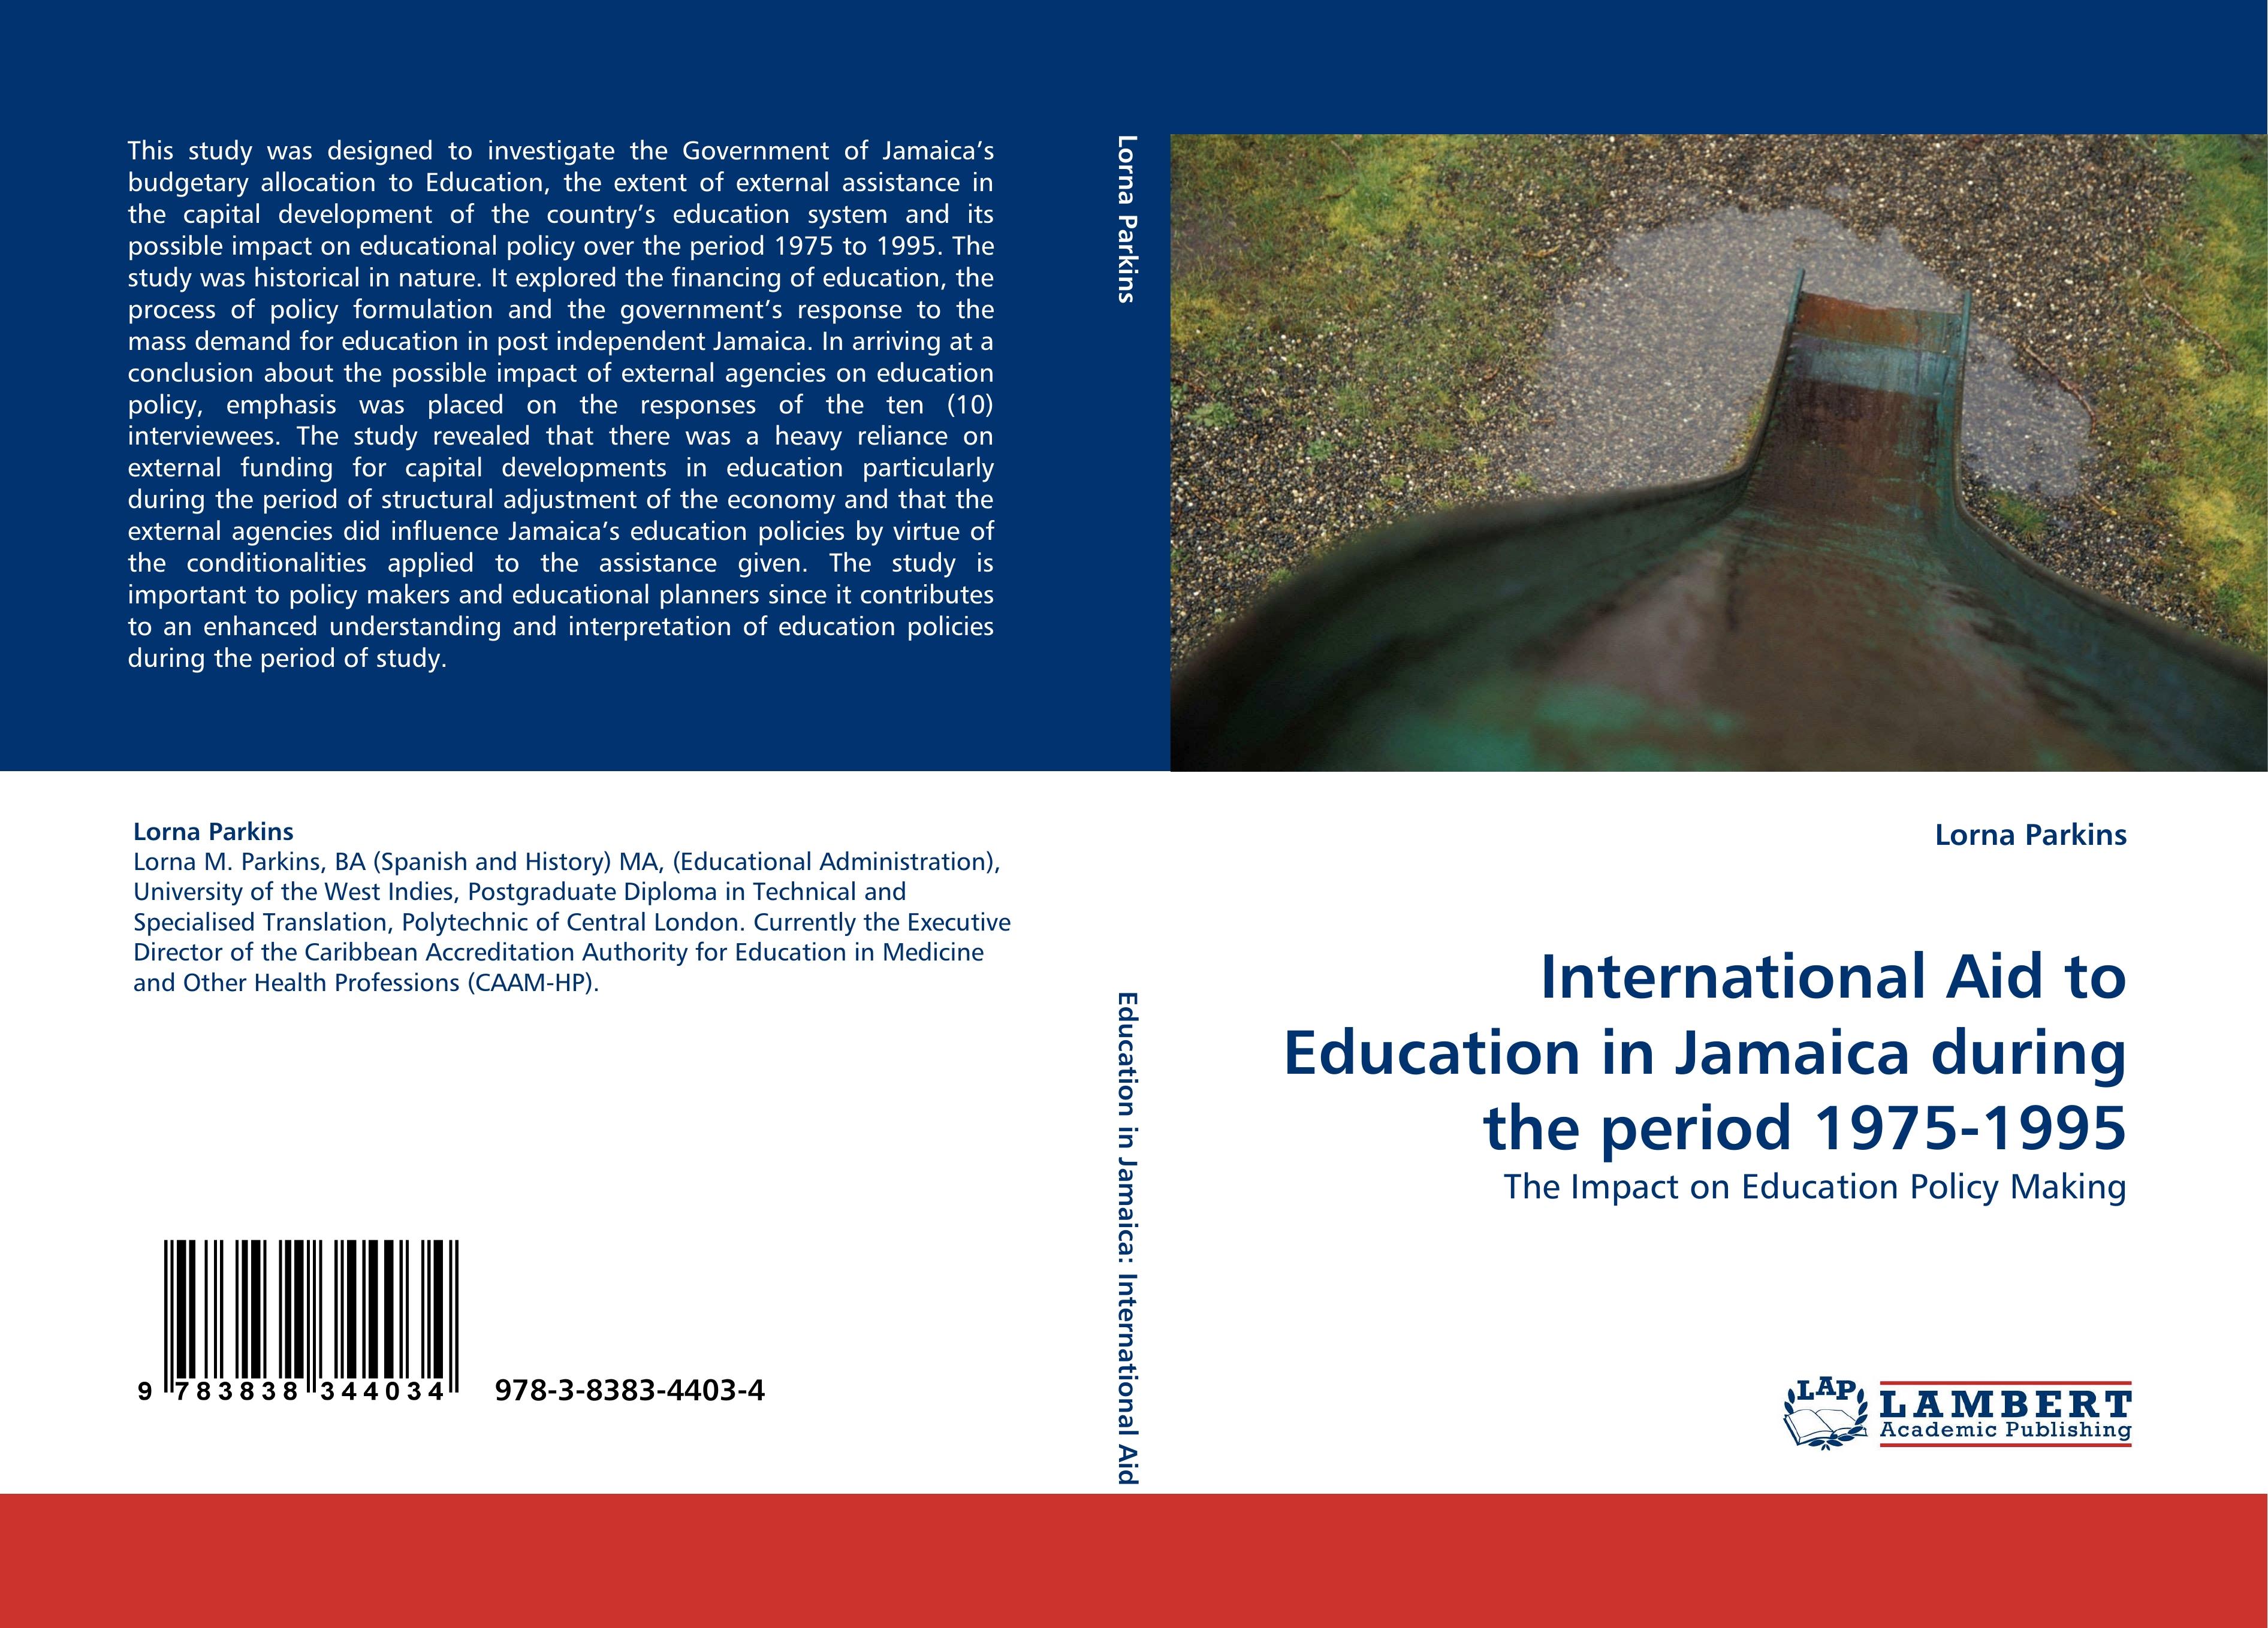 International Aid to Education in Jamaica during the period 1975-1995 | The Impact on Education Policy Making | Lorna Parkins | Taschenbuch | Paperback | 172 S. | Englisch | 2010 | EAN 9783838344034 - Parkins, Lorna